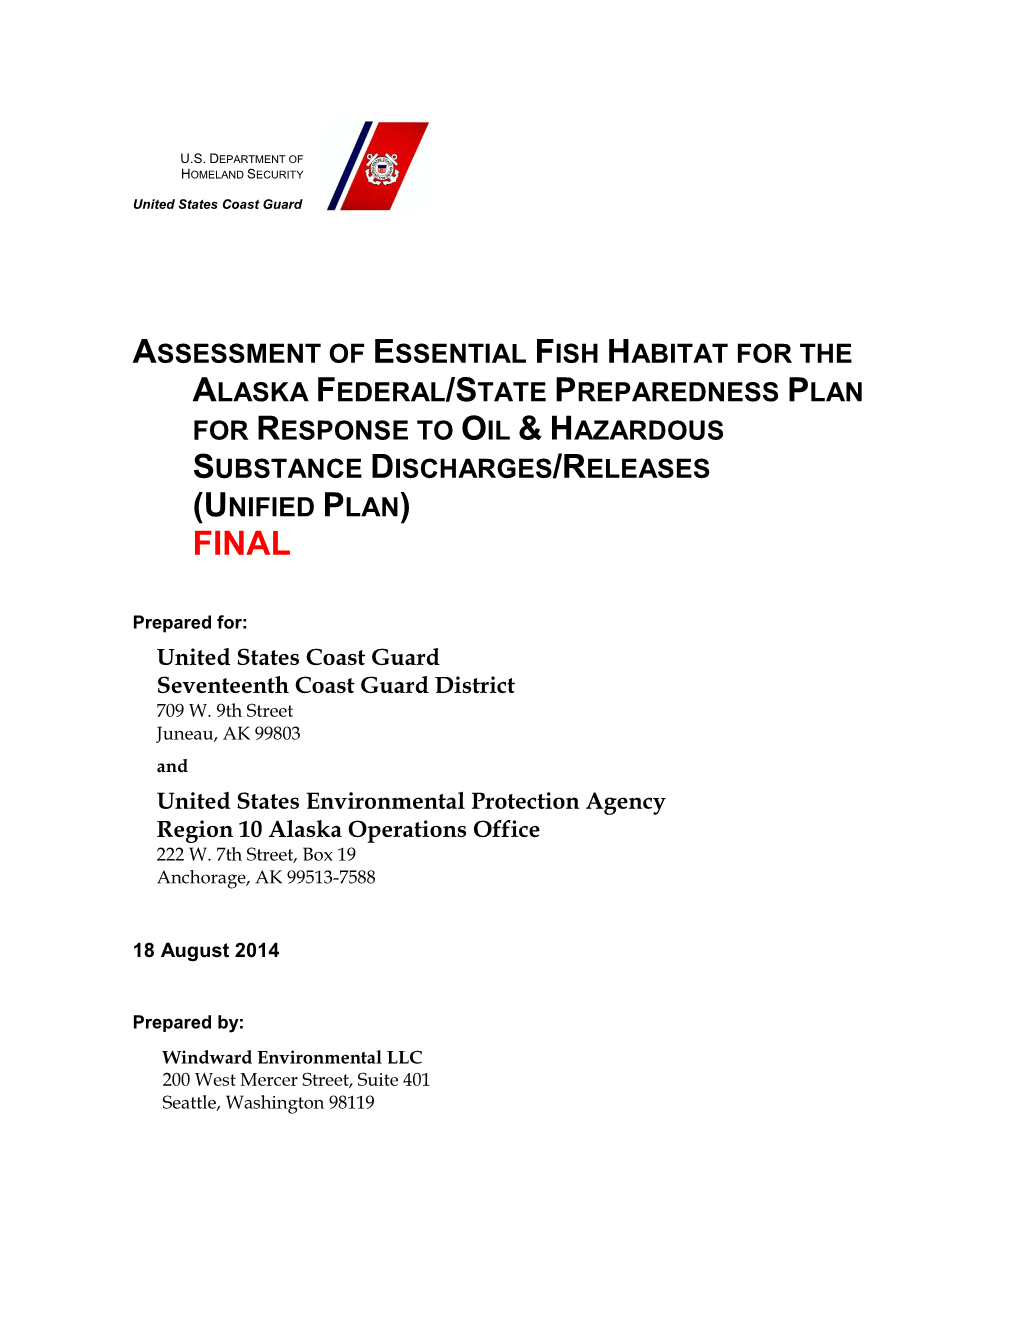 Assessment of Essential Fish Habitat for the Alaska Federal/State